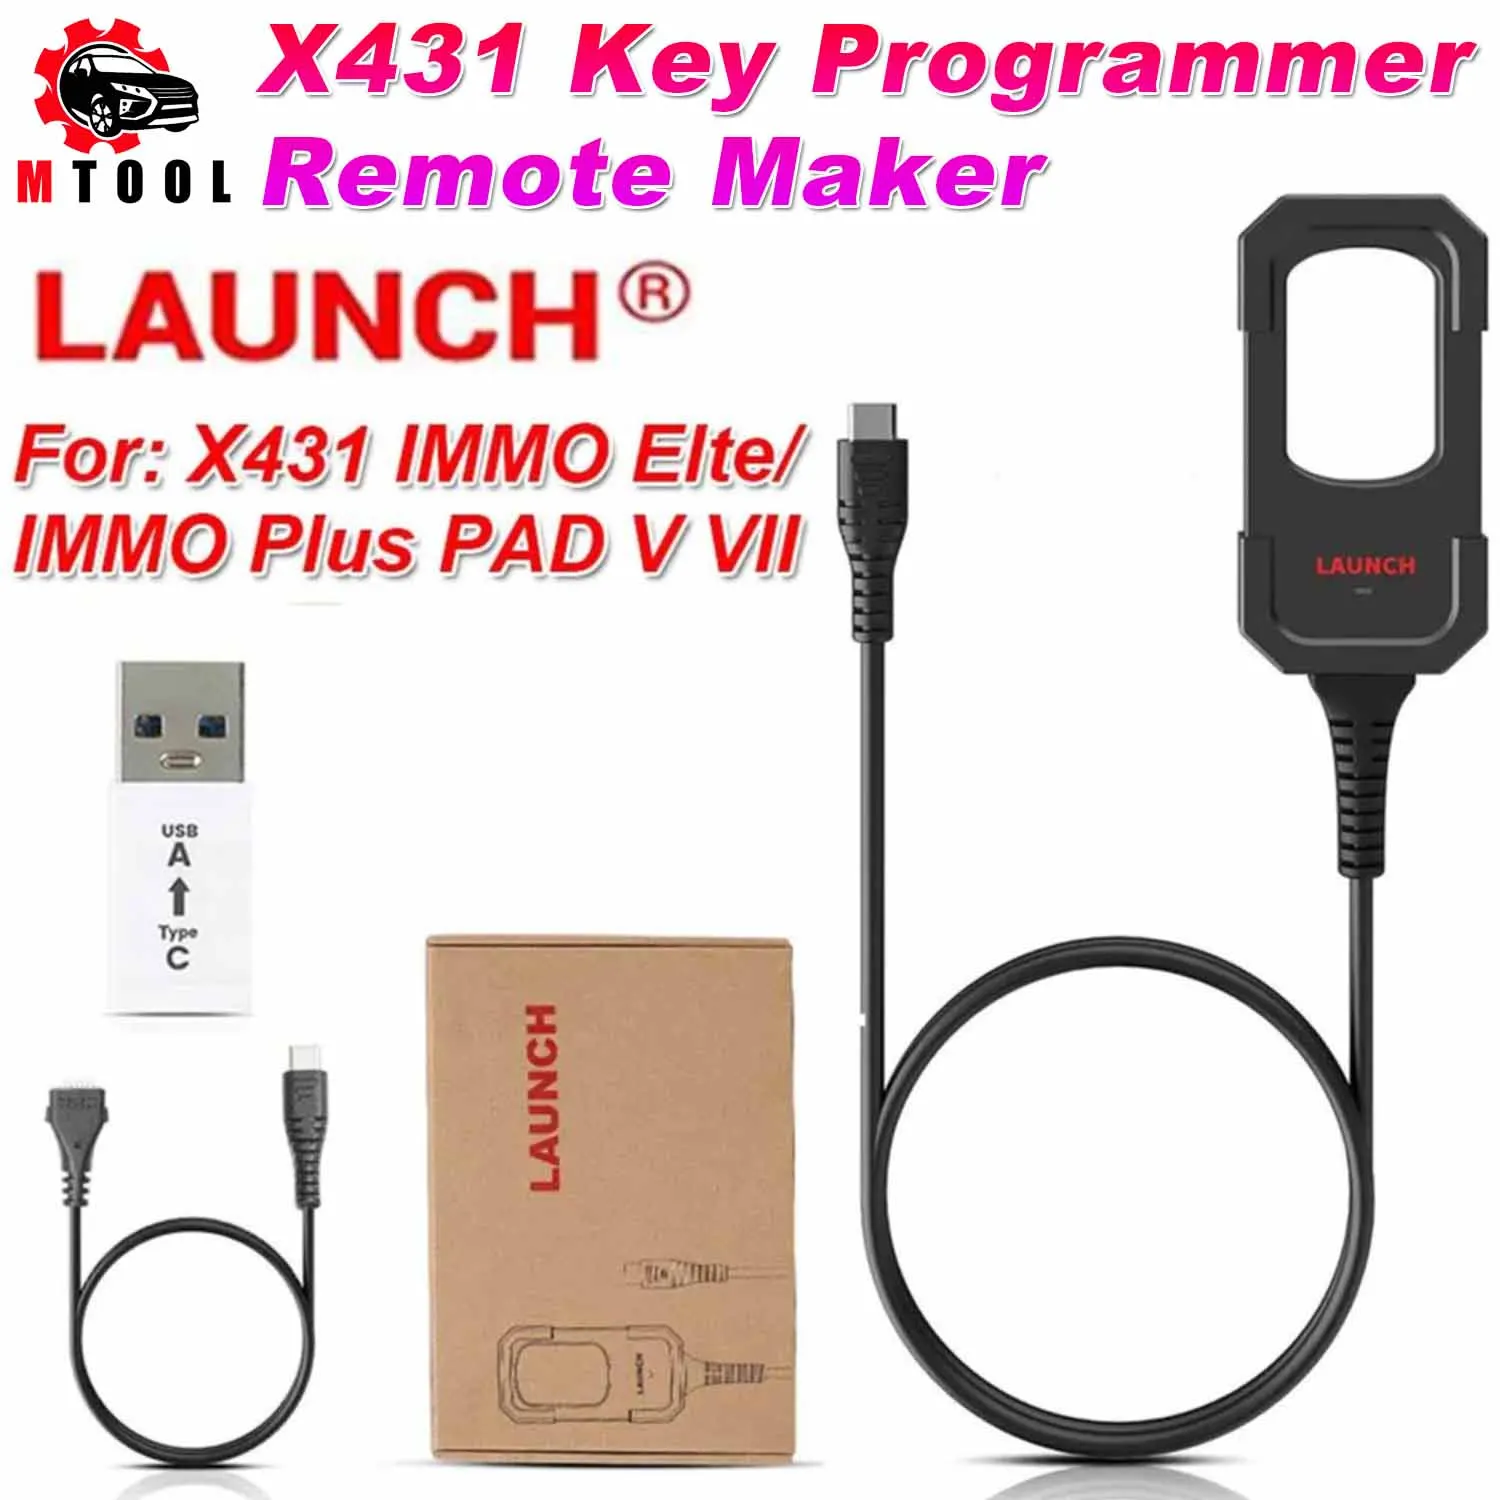 

Original Launch X431 Key Programmer Remote Maker Without Super Chip IMMO Programming Tool for X431 IMMO Elte IMMO Plus PAD V VII